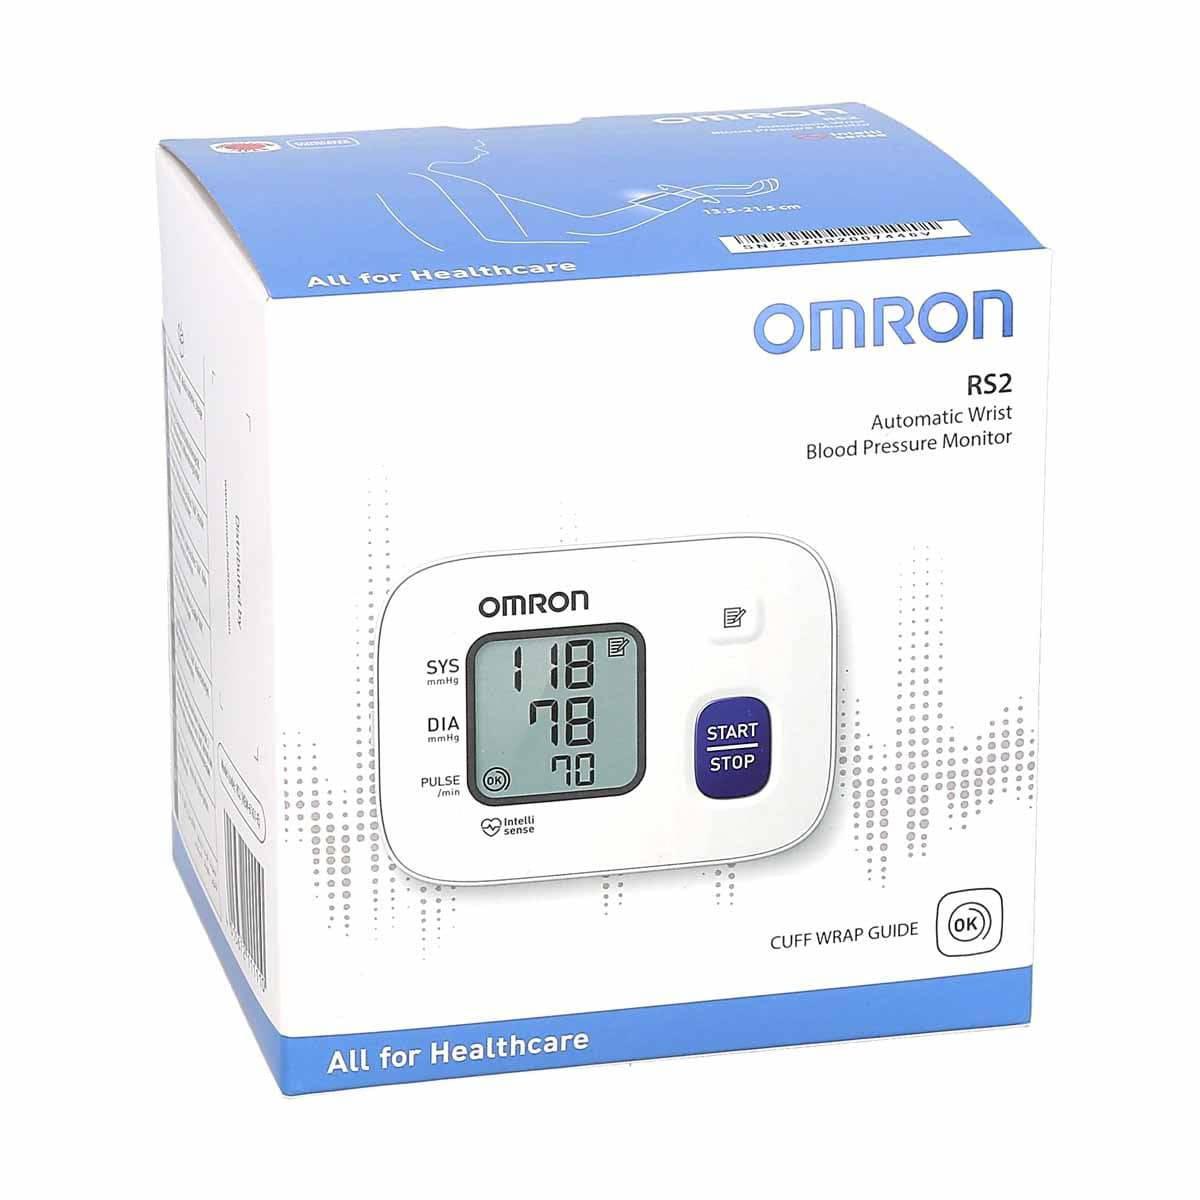 Omron RS2 Intellisense Automatic Wrist Blood Pressure Monitor, Large LCD Display - Healthxpress.ie